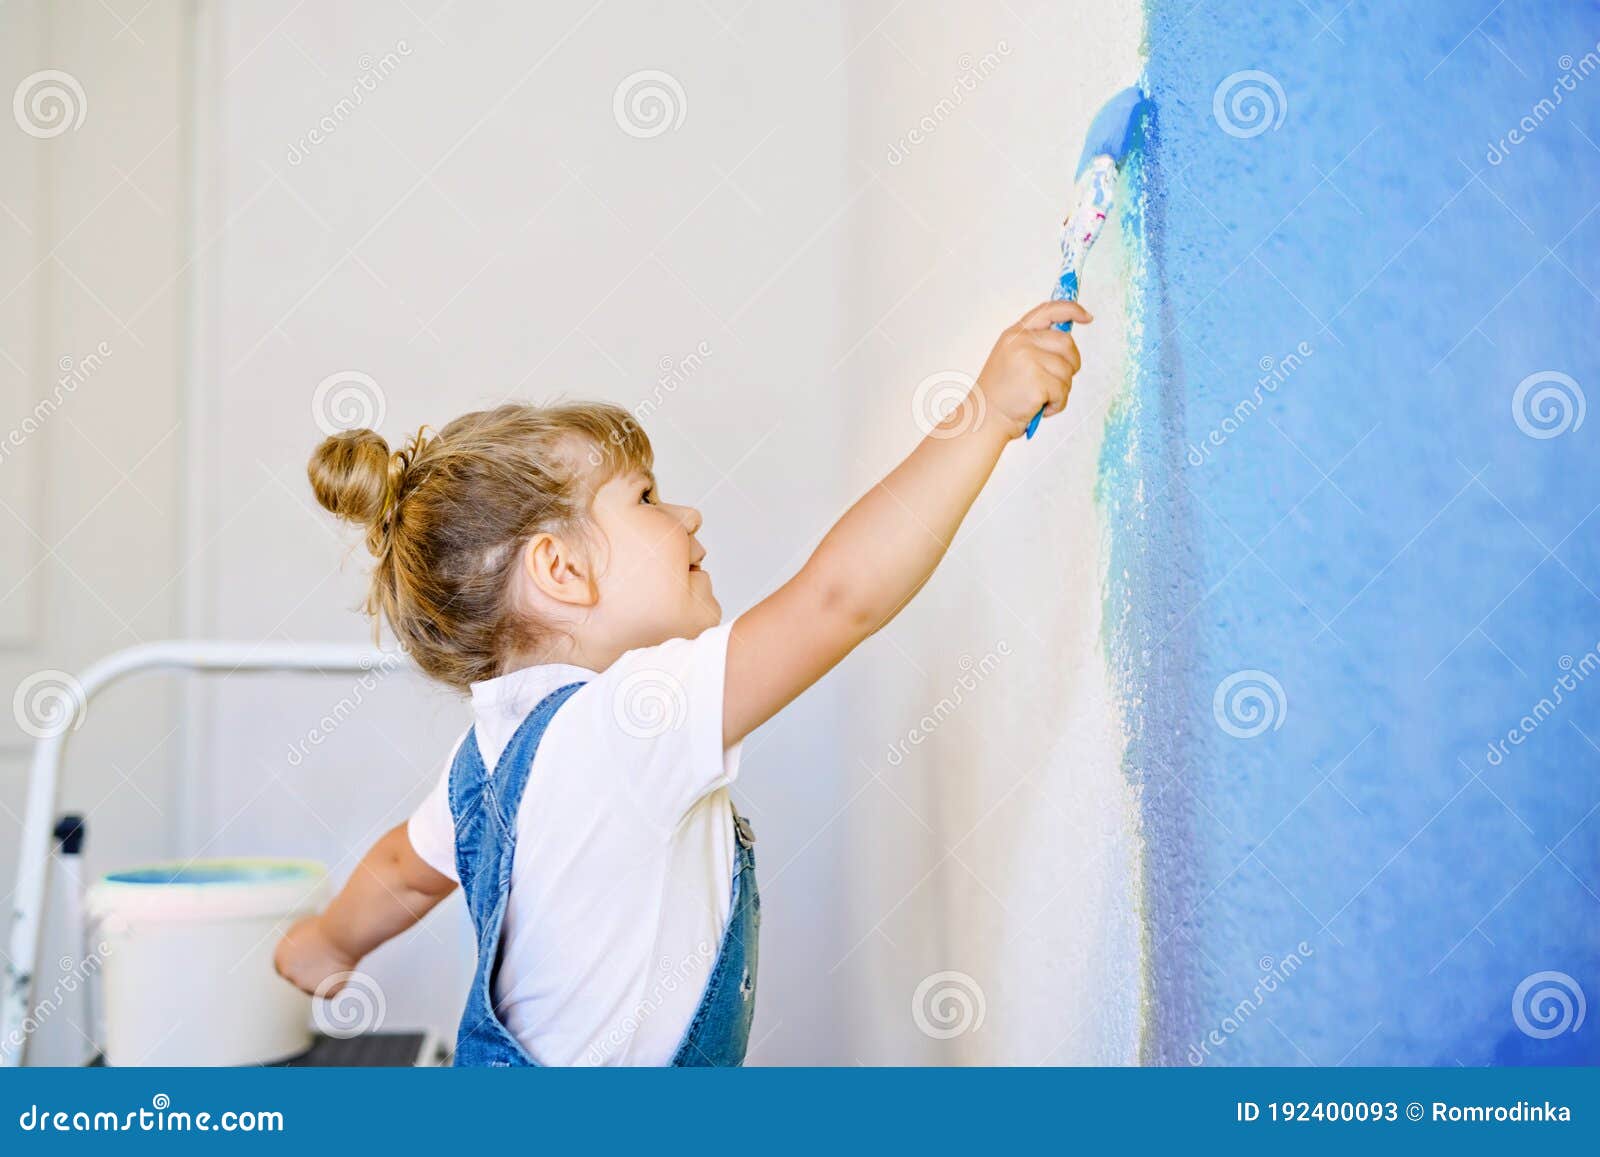 Funny Little Toddler Girl Painting the Wall with Color in New House. Family  Repair Apartment Home Stock Image - Image of chic, happiness: 192400093